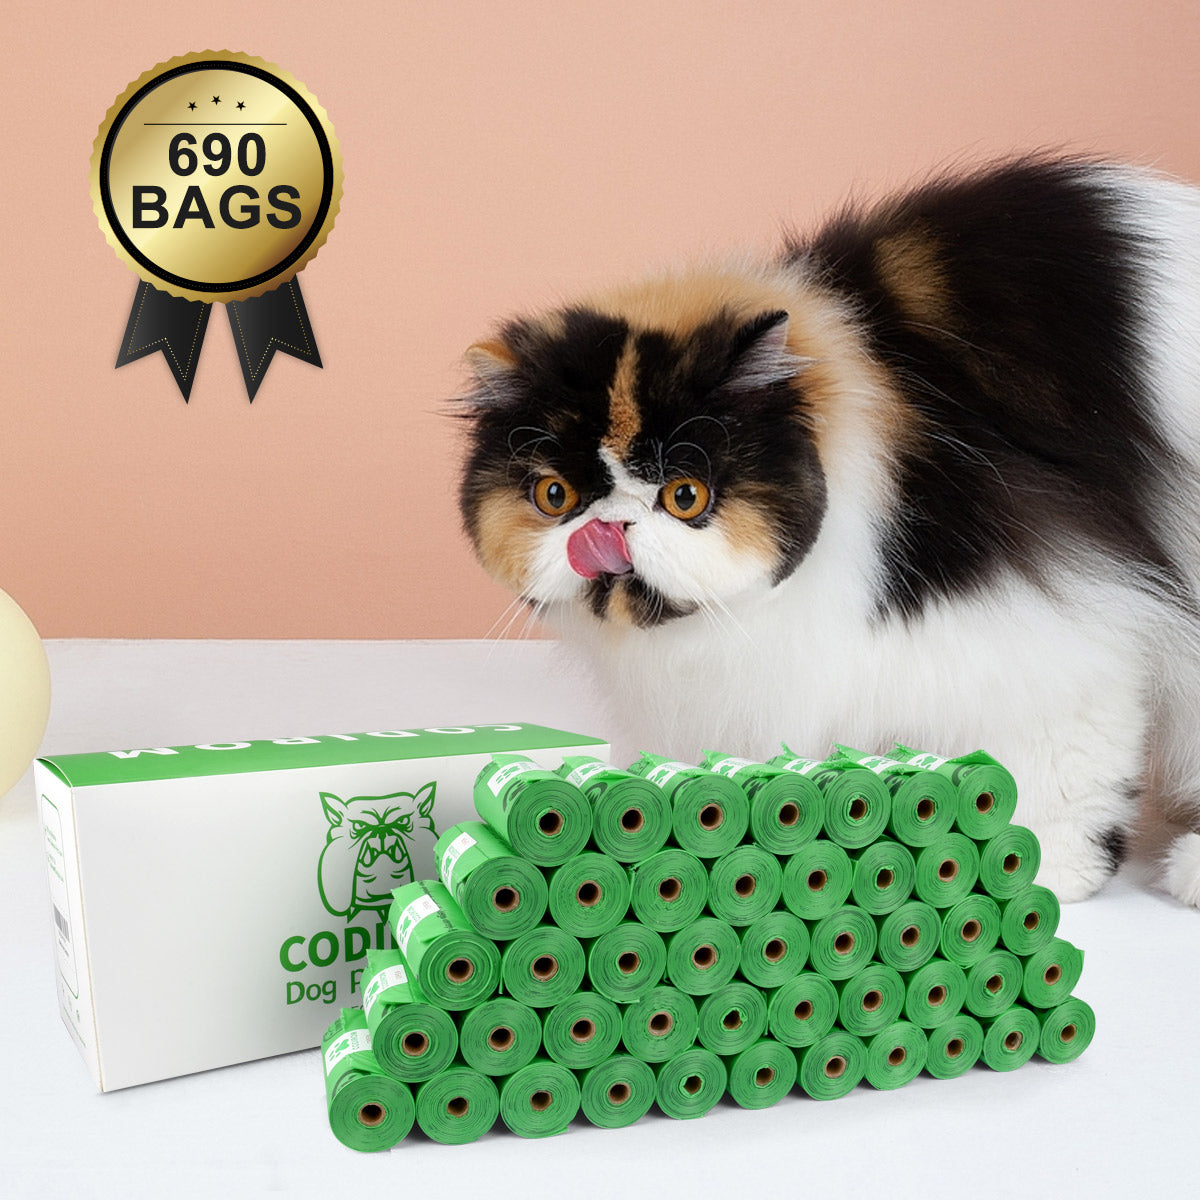 Biodegradable Eco-Friendly Dog Poop Bags 690 Counts 46 Rolls-GREEN